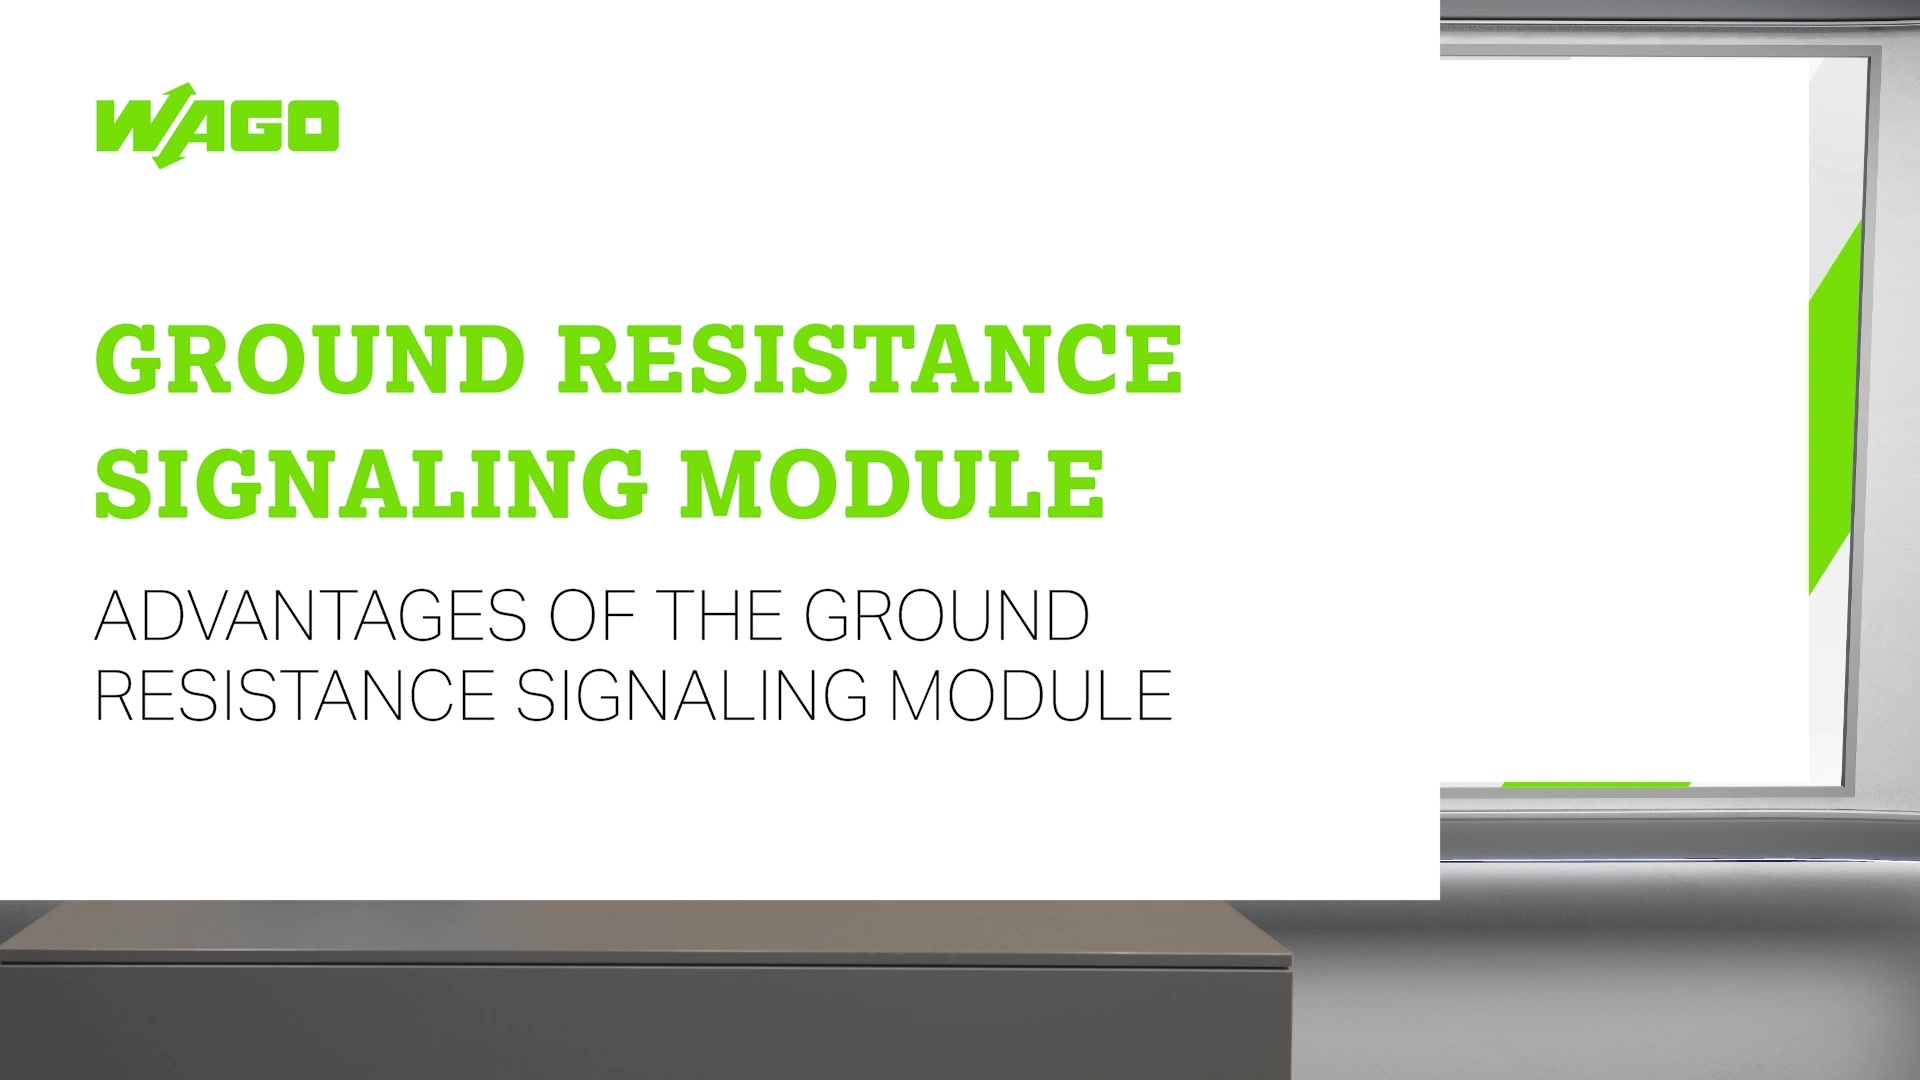 Benefits of the Ground Resistance Signaling Module